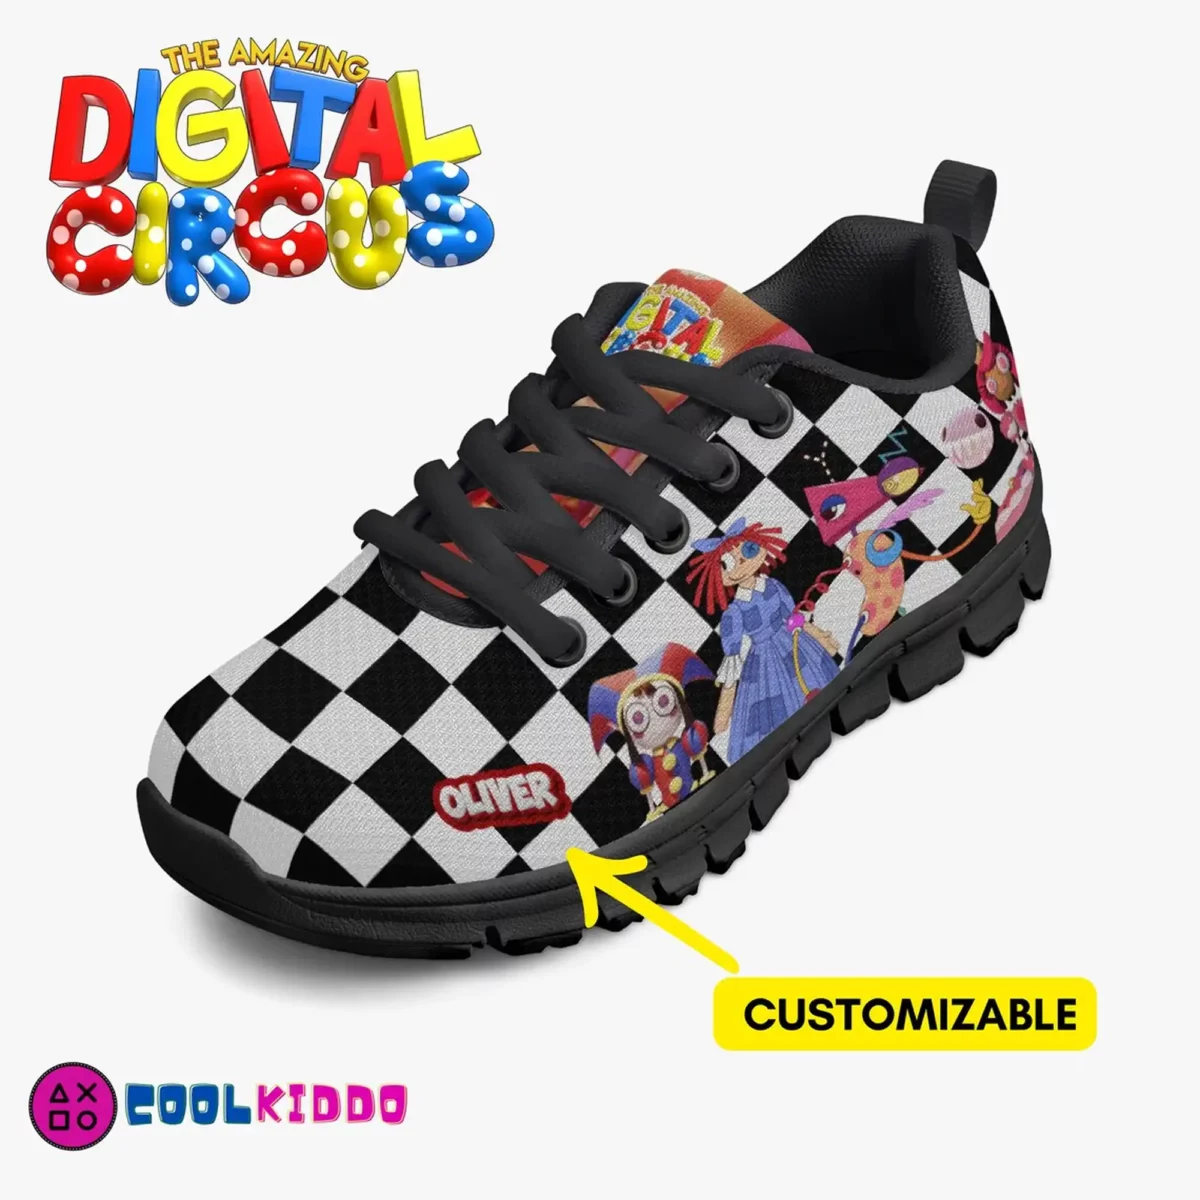 Personalized Shoes | The Amazing Digital Circus Animated Series Inspired Lightweight Mesh Sneakers Cool Kiddo 10